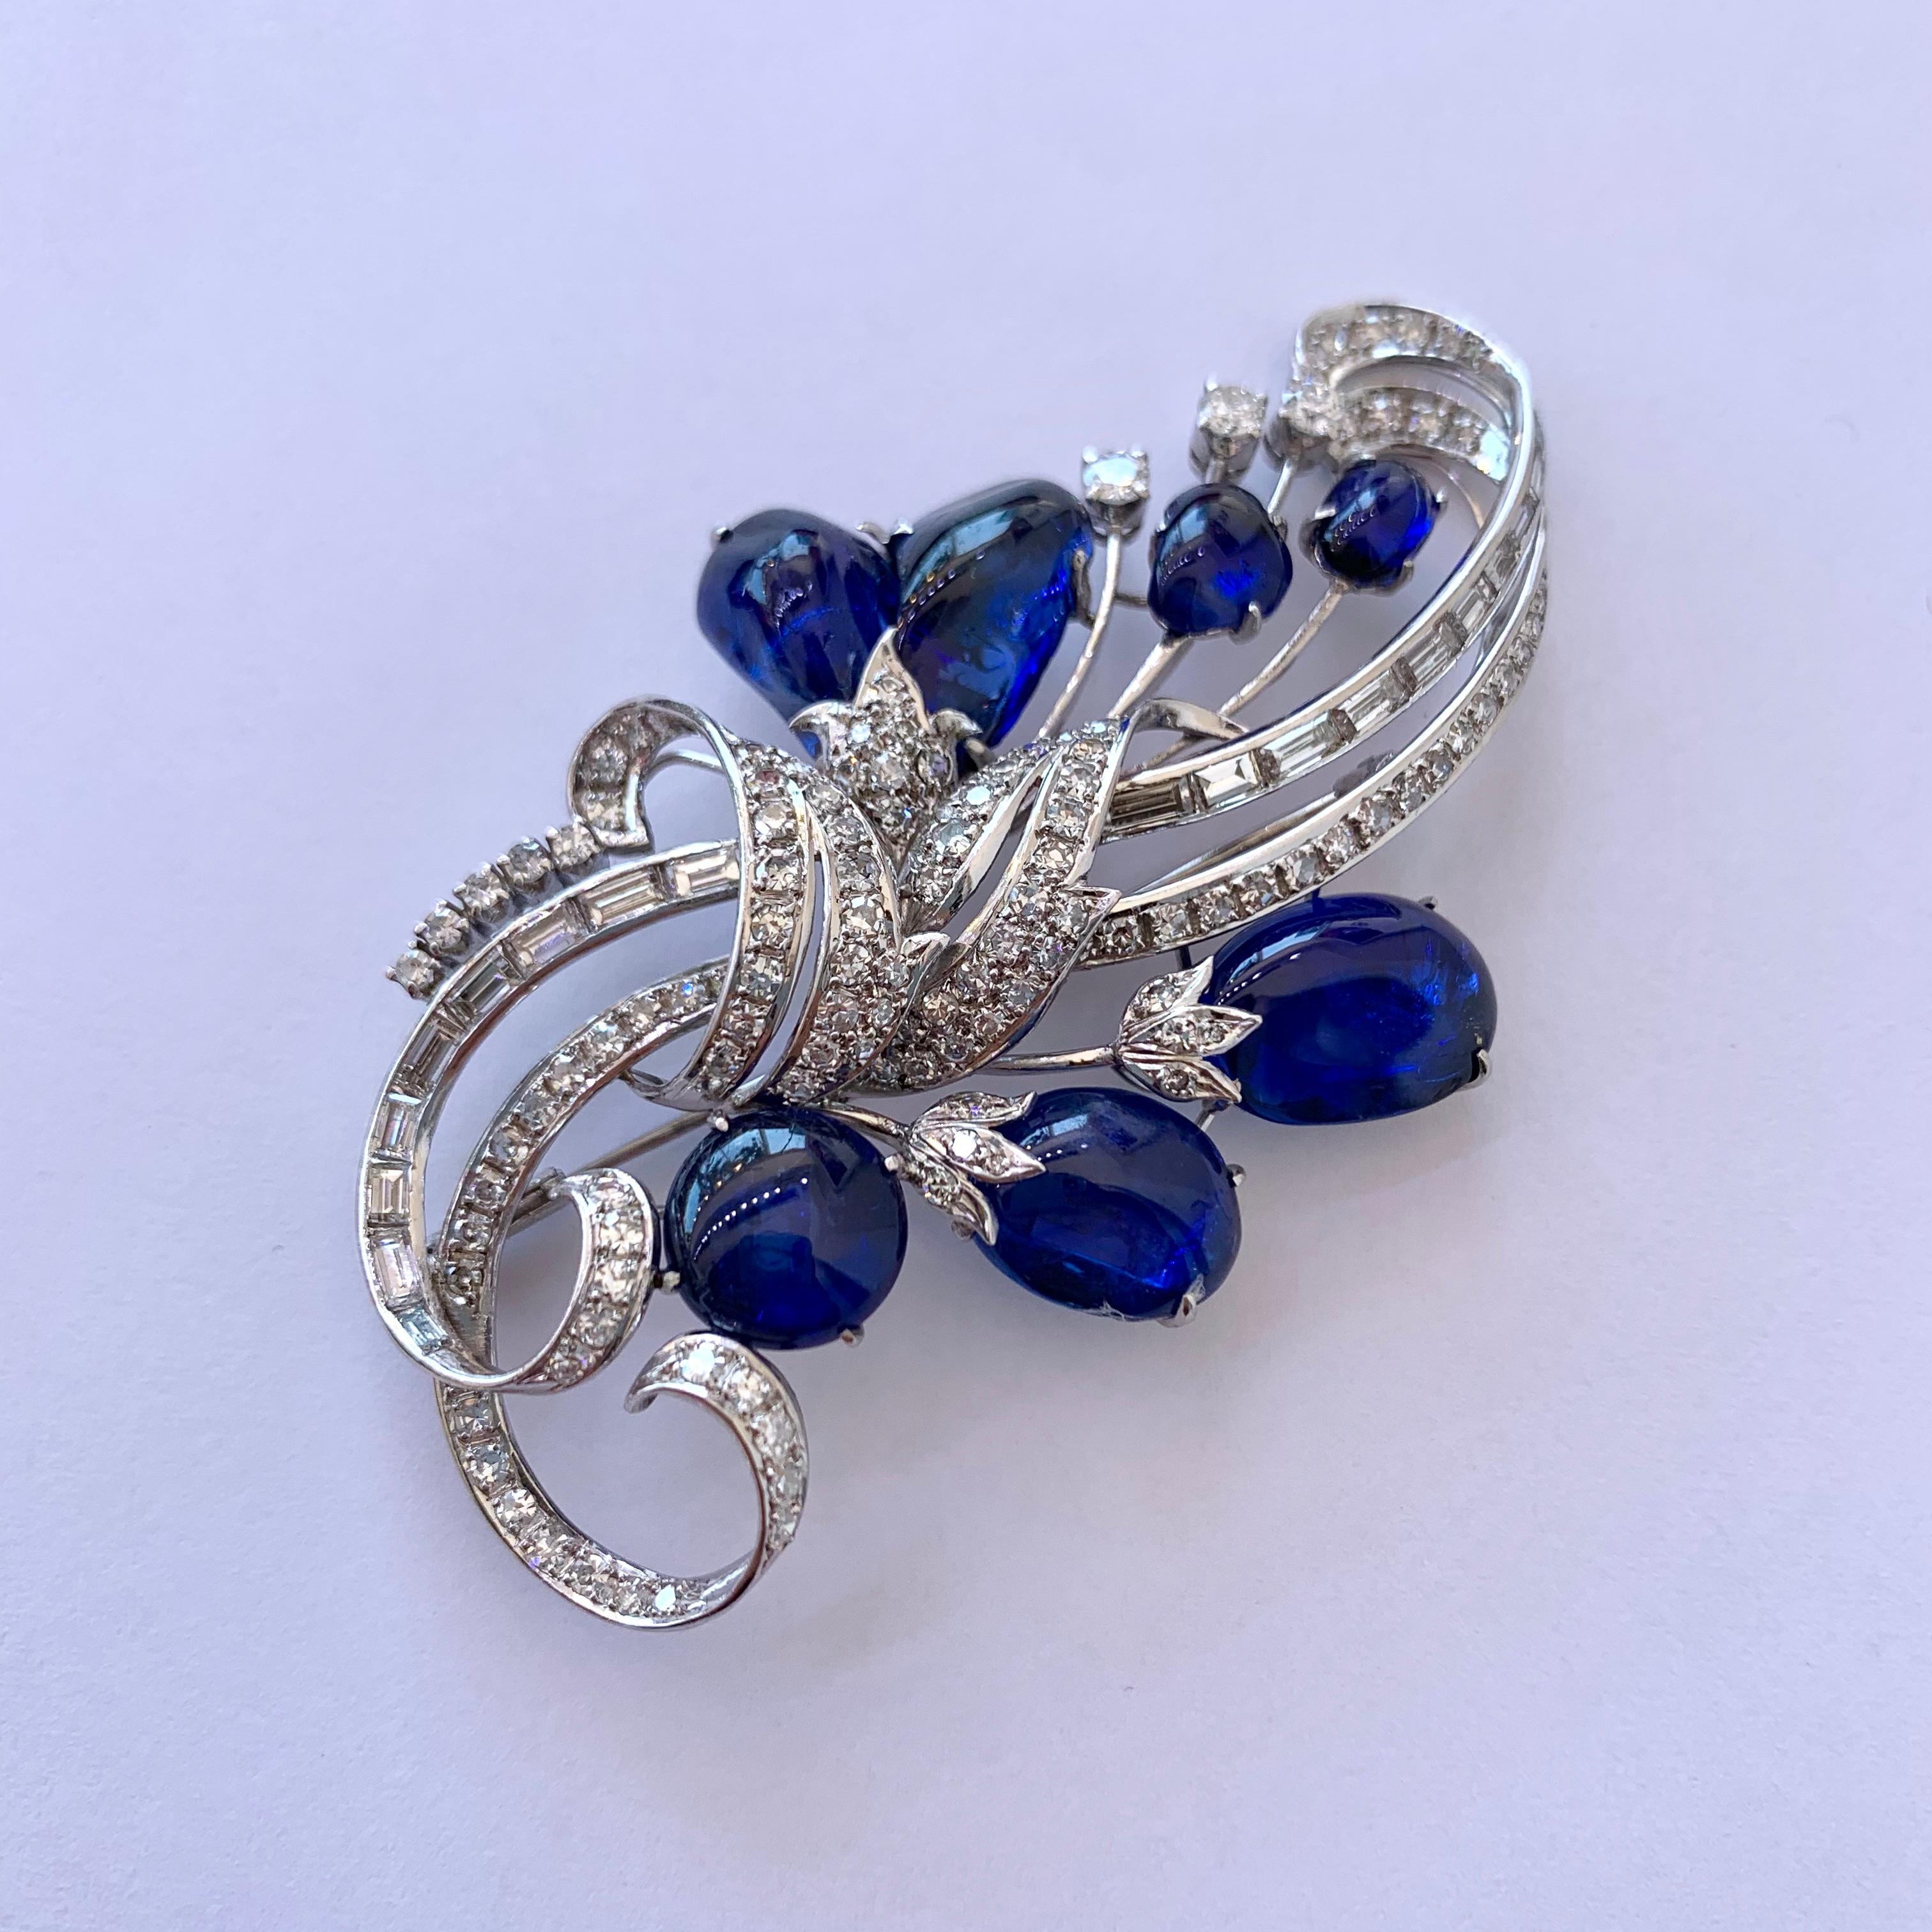 The vibrant blue sapphire and diamond vintage platinum brooch is designed with a floral and ribbon motif, and contains 33cts of vibrant blue tumbled sapphires, and approximately 3.33cts of single cut round and baguette cut diamonds.